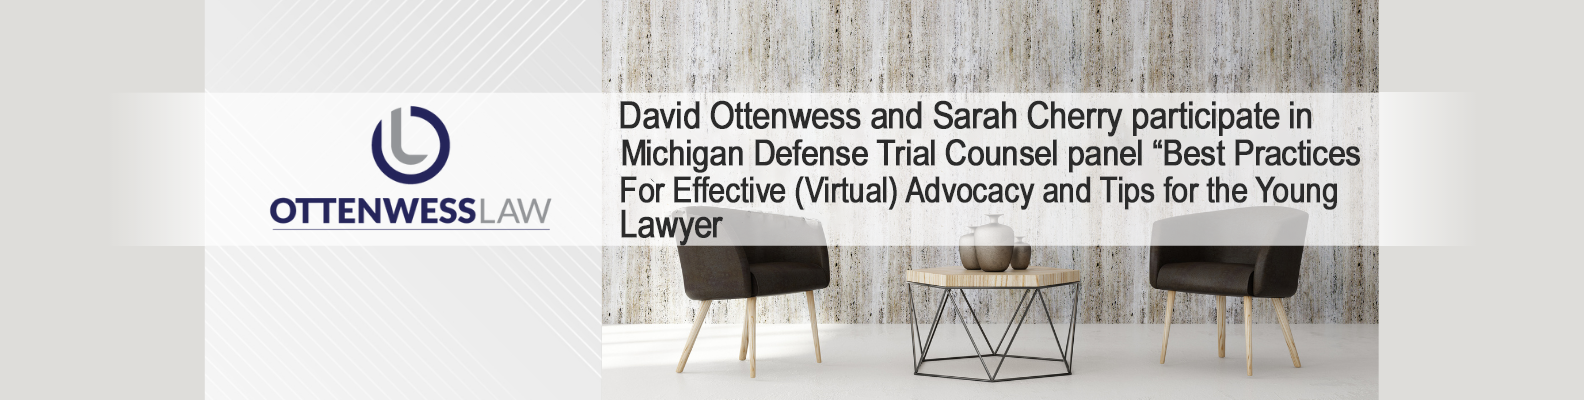 David Ottenwess and Sarah Cherry participate in Michigan Defense Trial Counsel panel “Best Practices For Effective (Virtual) Advocacy and Tips for the Young Lawyer